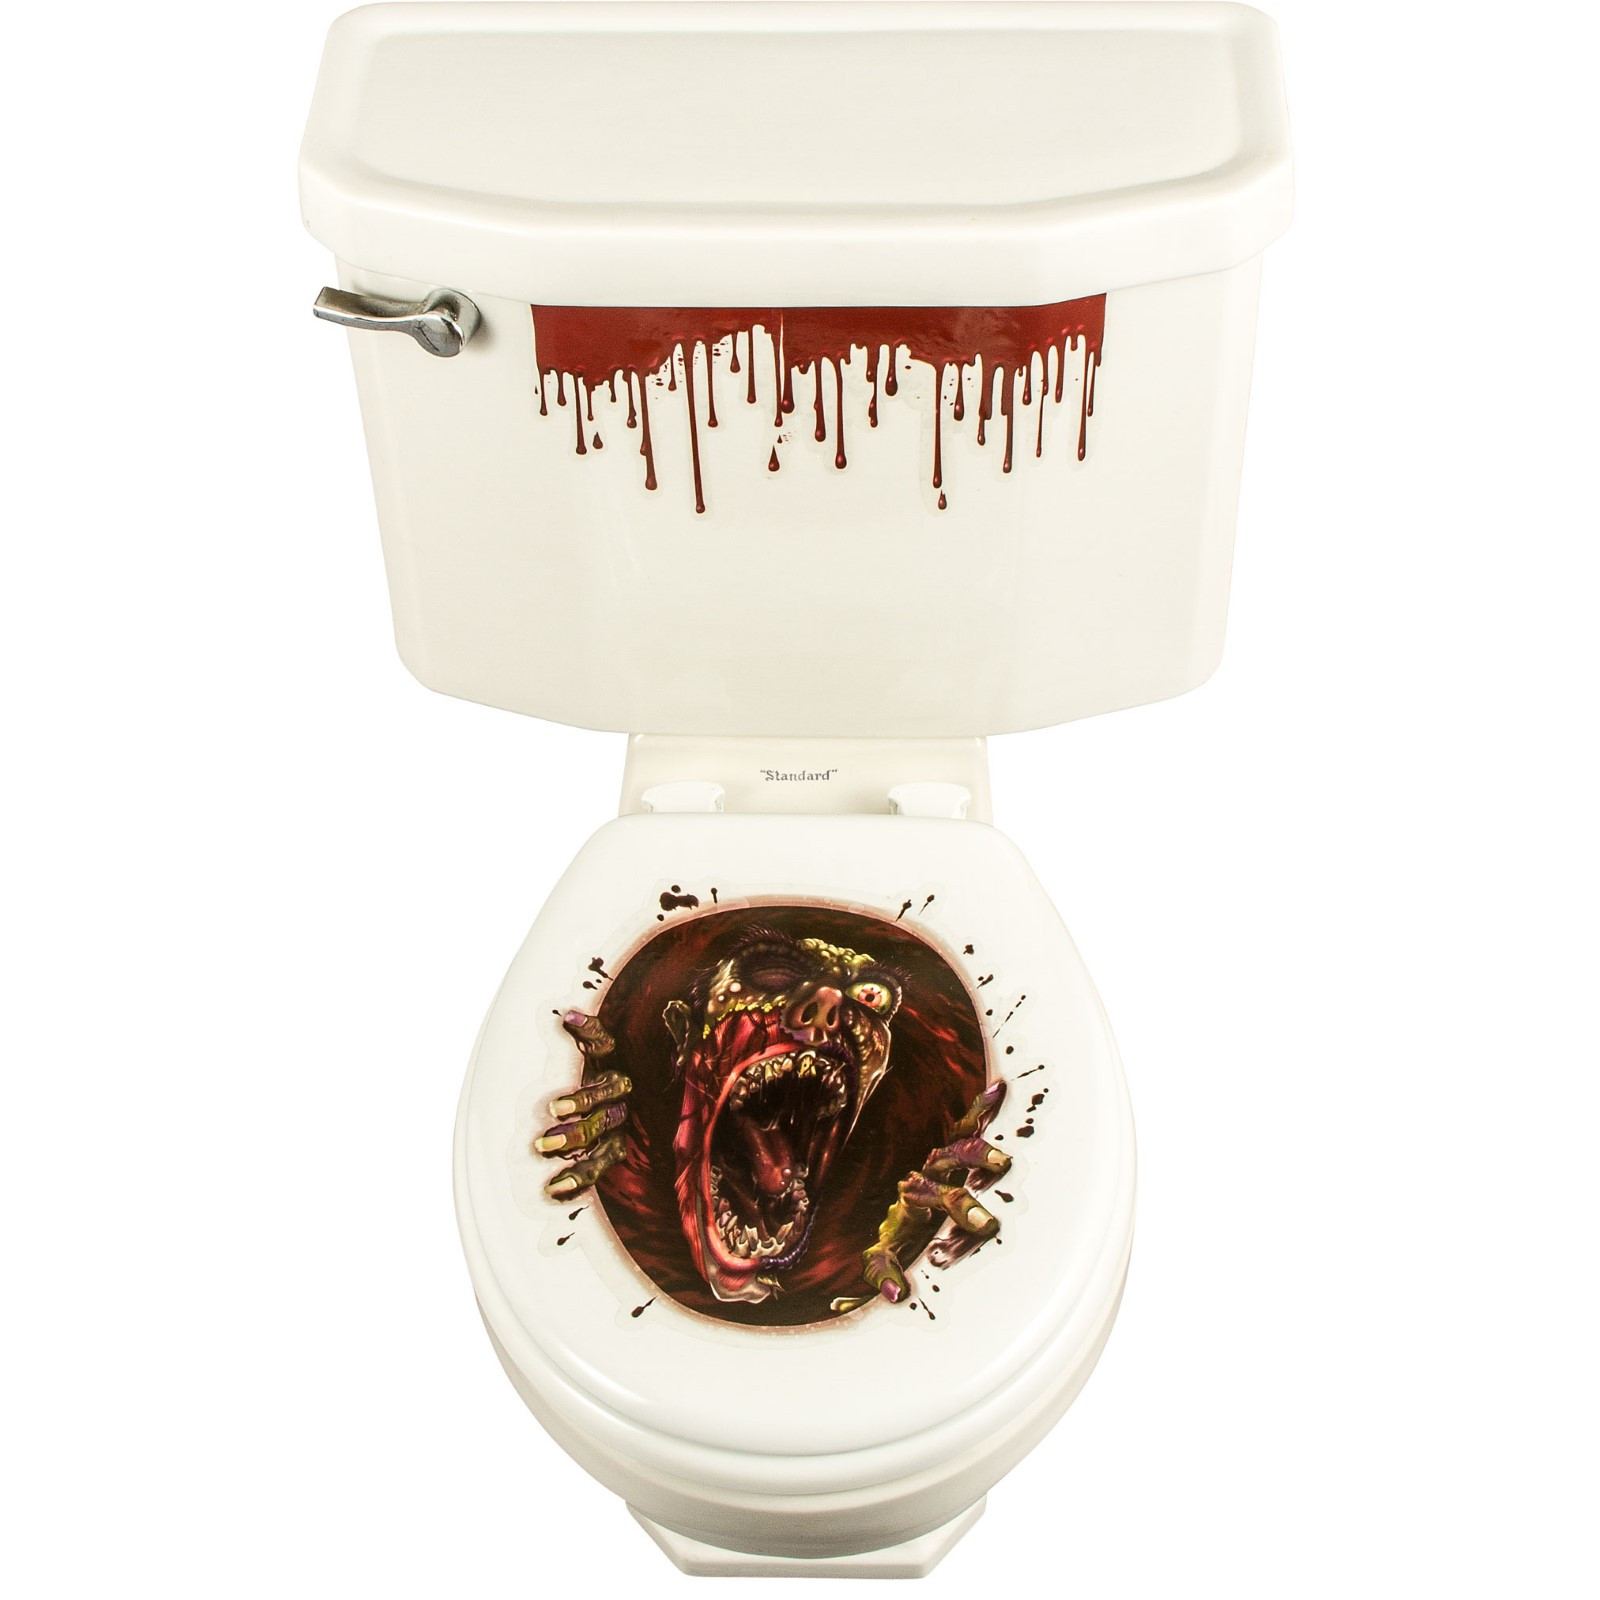 Halloween Toilet Seat Cover
 HALLOWEEN SCARY ZOMBIE TOILET SEAT STICK ON COVER DECAL